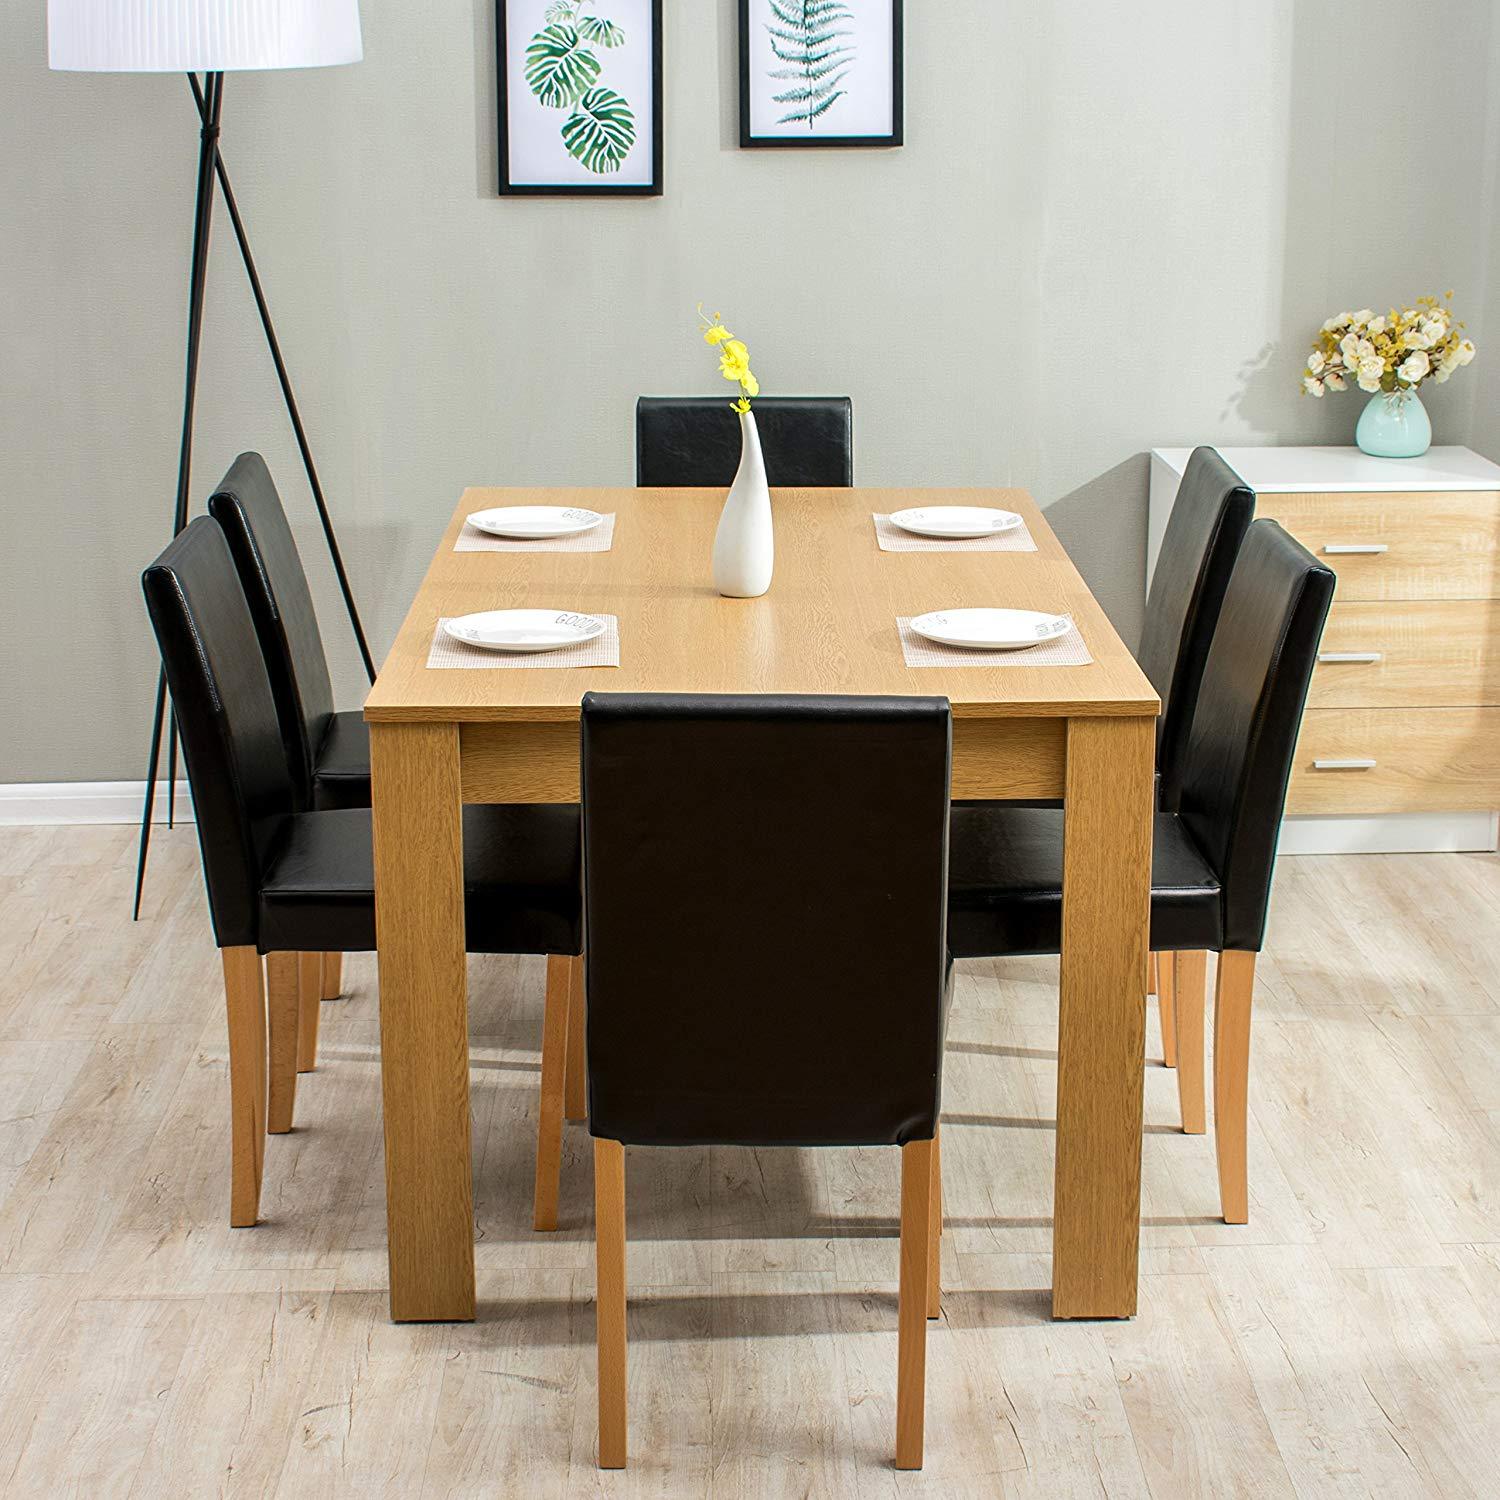 7-Piece Dining Room Set 6-Seater Dining Table with 6 Chairs Oak Effect